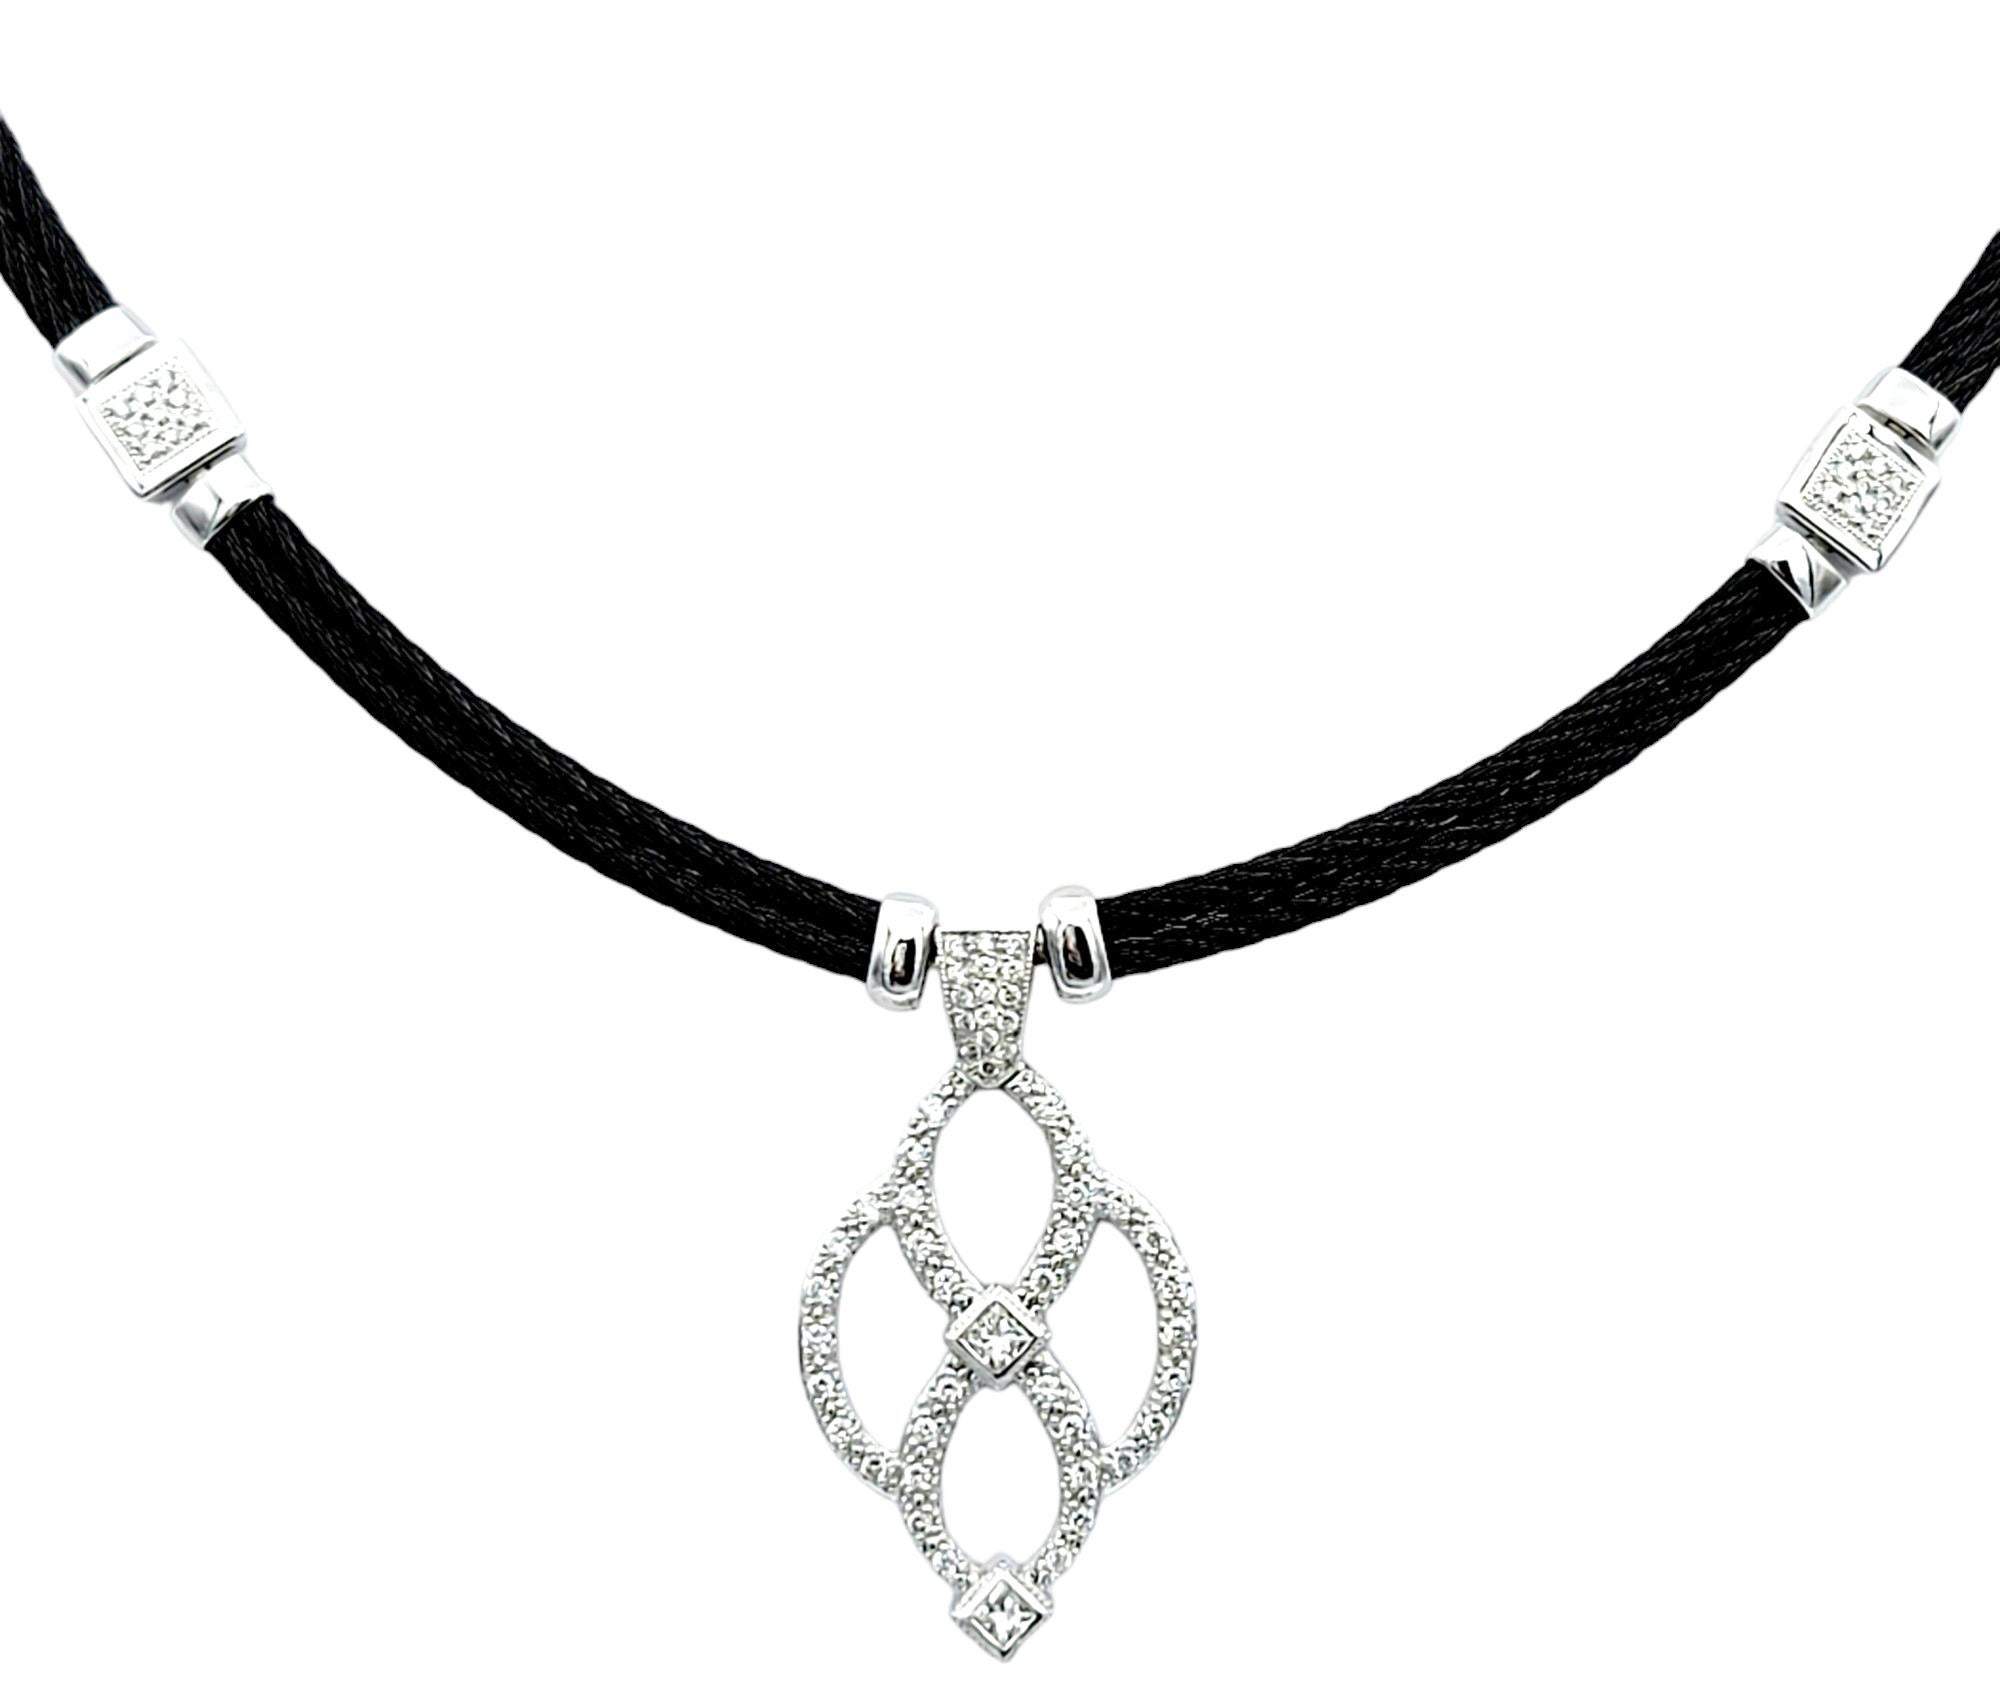 This gorgeous Philippe Charriol Celtic Noir diamond station necklace seamlessly blends contemporary elegance with timeless Celtic motifs. Crafted with meticulous attention to detail, this necklace features a black stainless steel cord adorned with